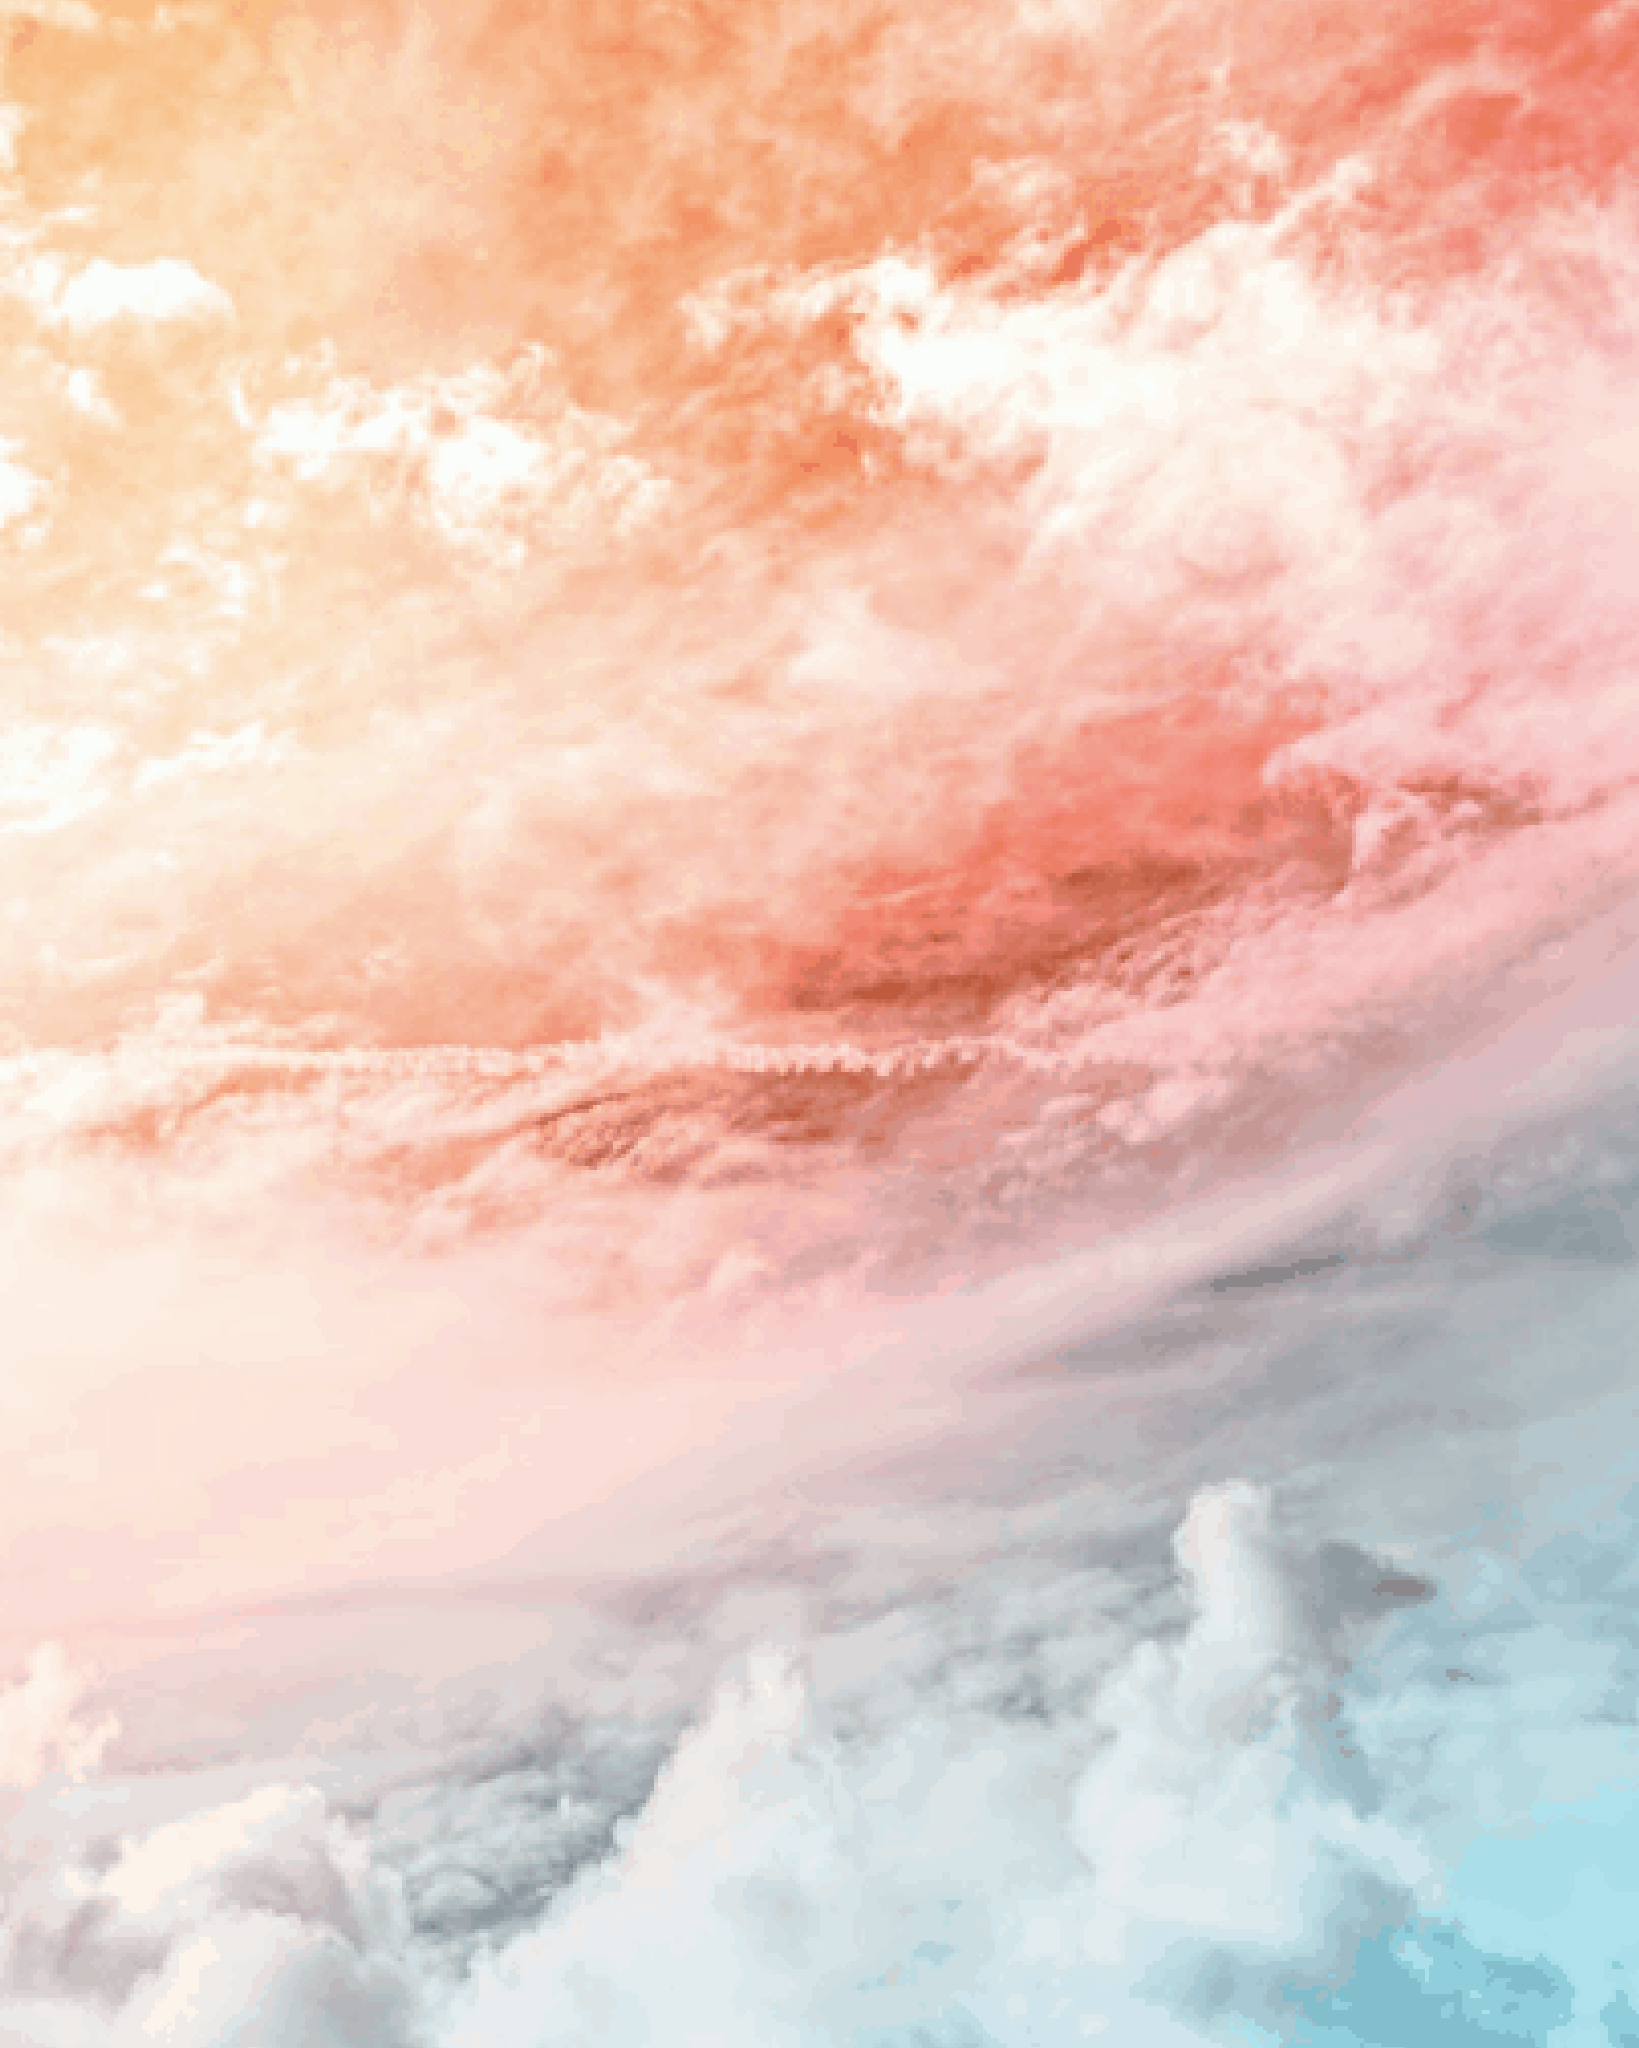 AMAZING FREE CLOUD AESTHETIC WALLPAPER FOR YOUR IPHONE! & Pearls